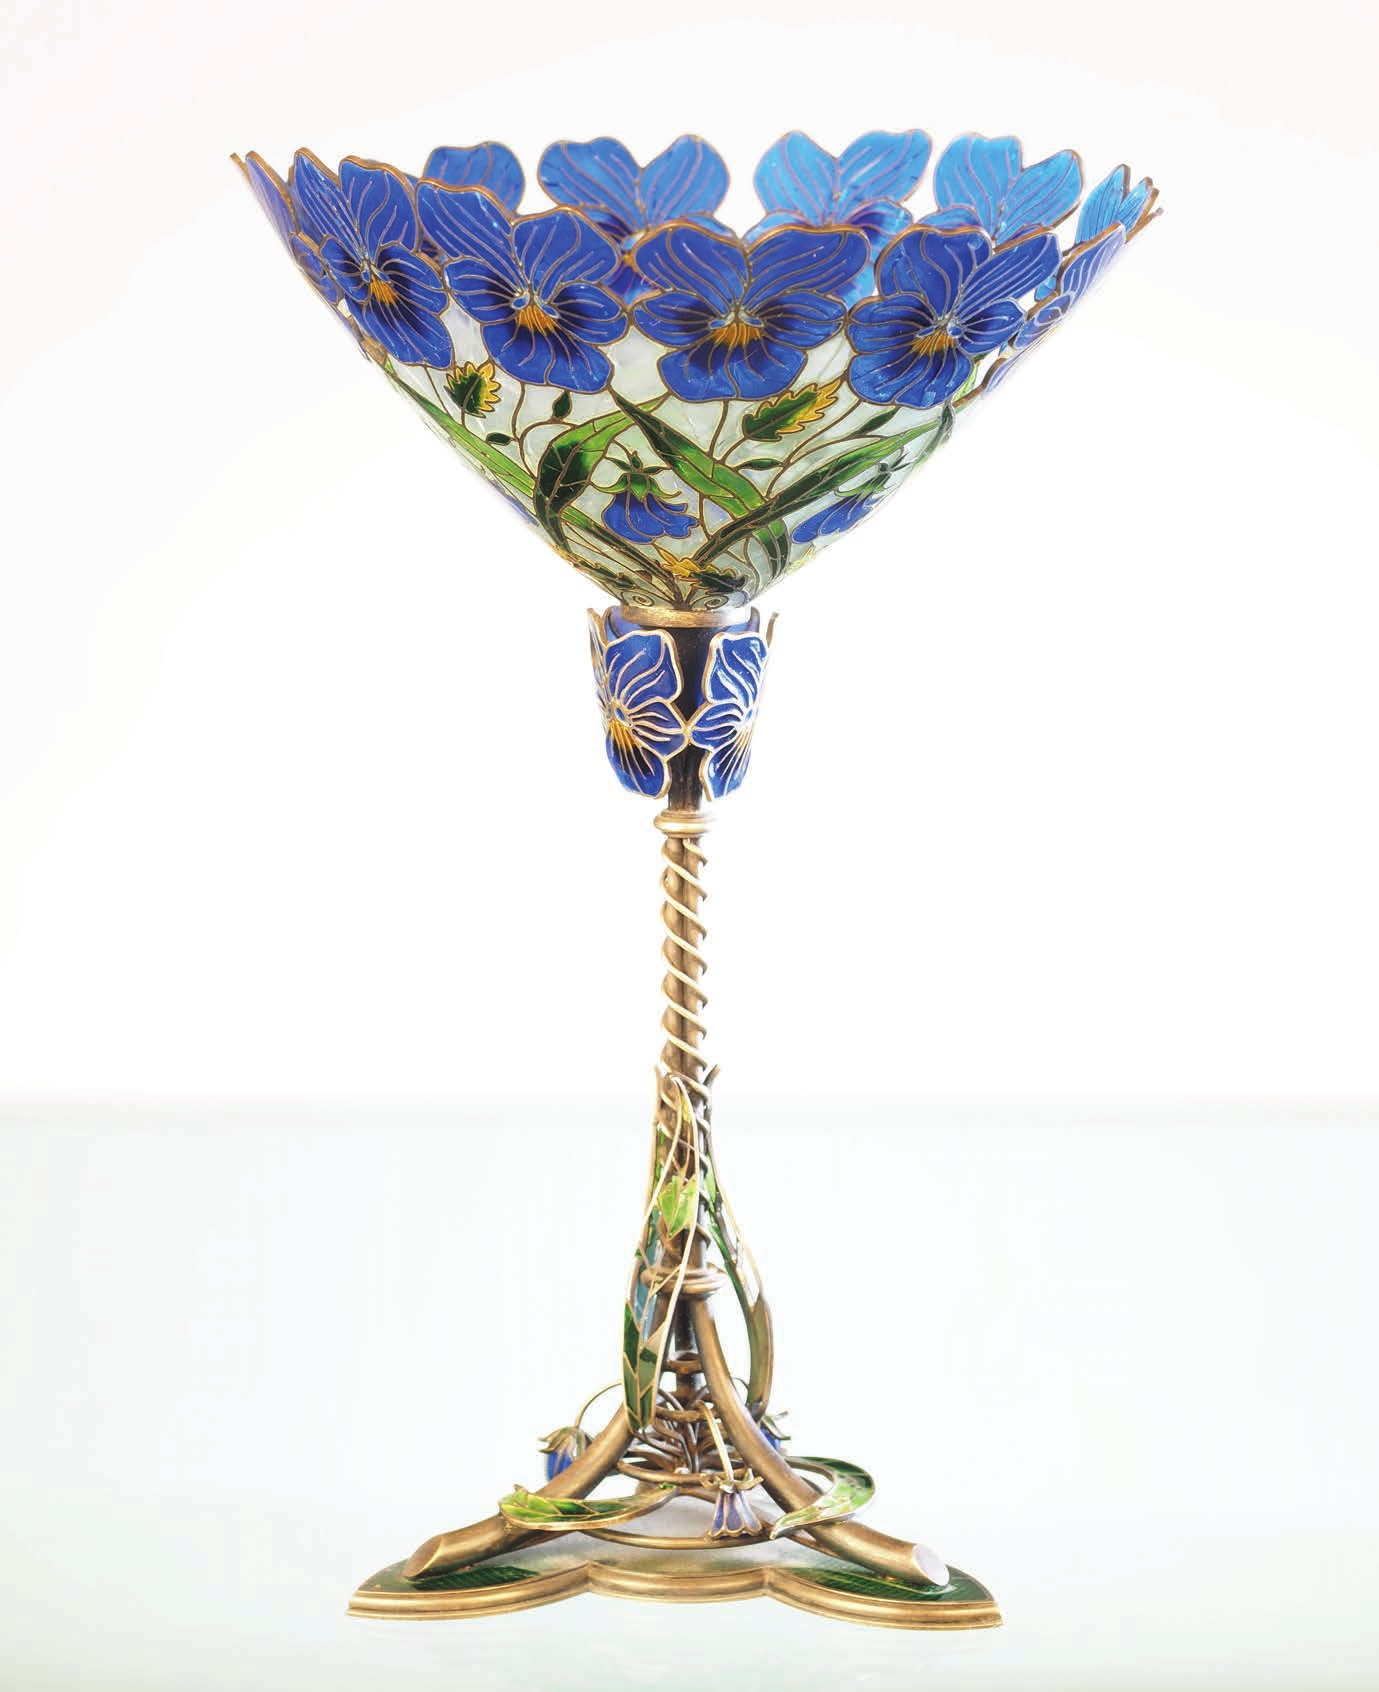 Cup - J. Tostrup atelier, Kristiania (Oslo), 1880 - 1890, brass, casting, wire drawing, silver plating, enamel, cloisonné.png